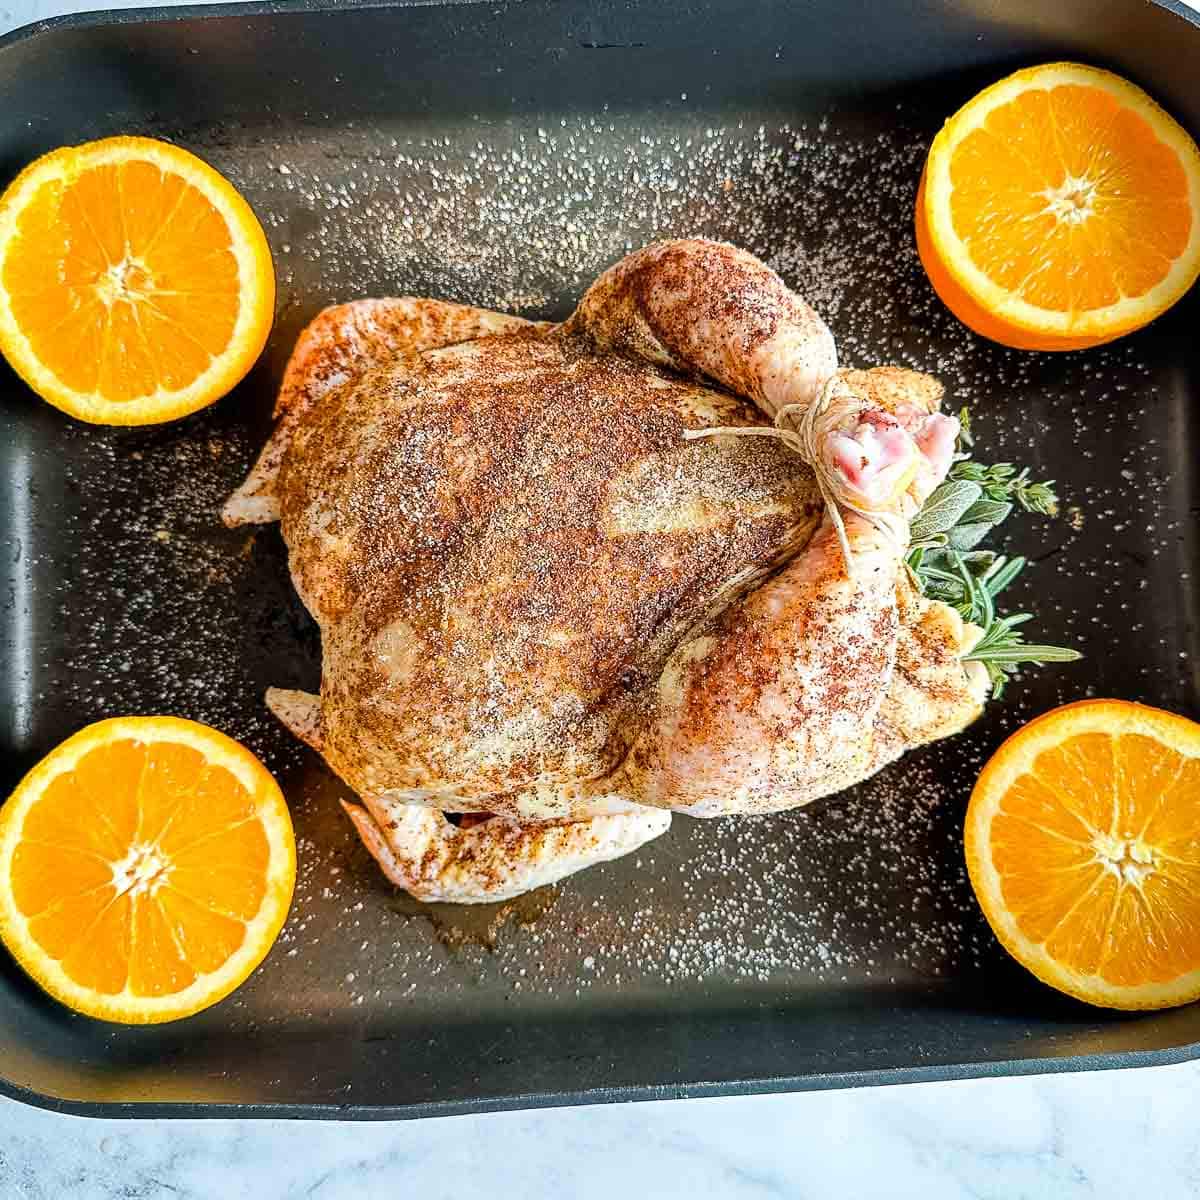 Raw Christmas Roast Chicken coated in spices and stuffed with herbs in a roasting pan with halved oranges.